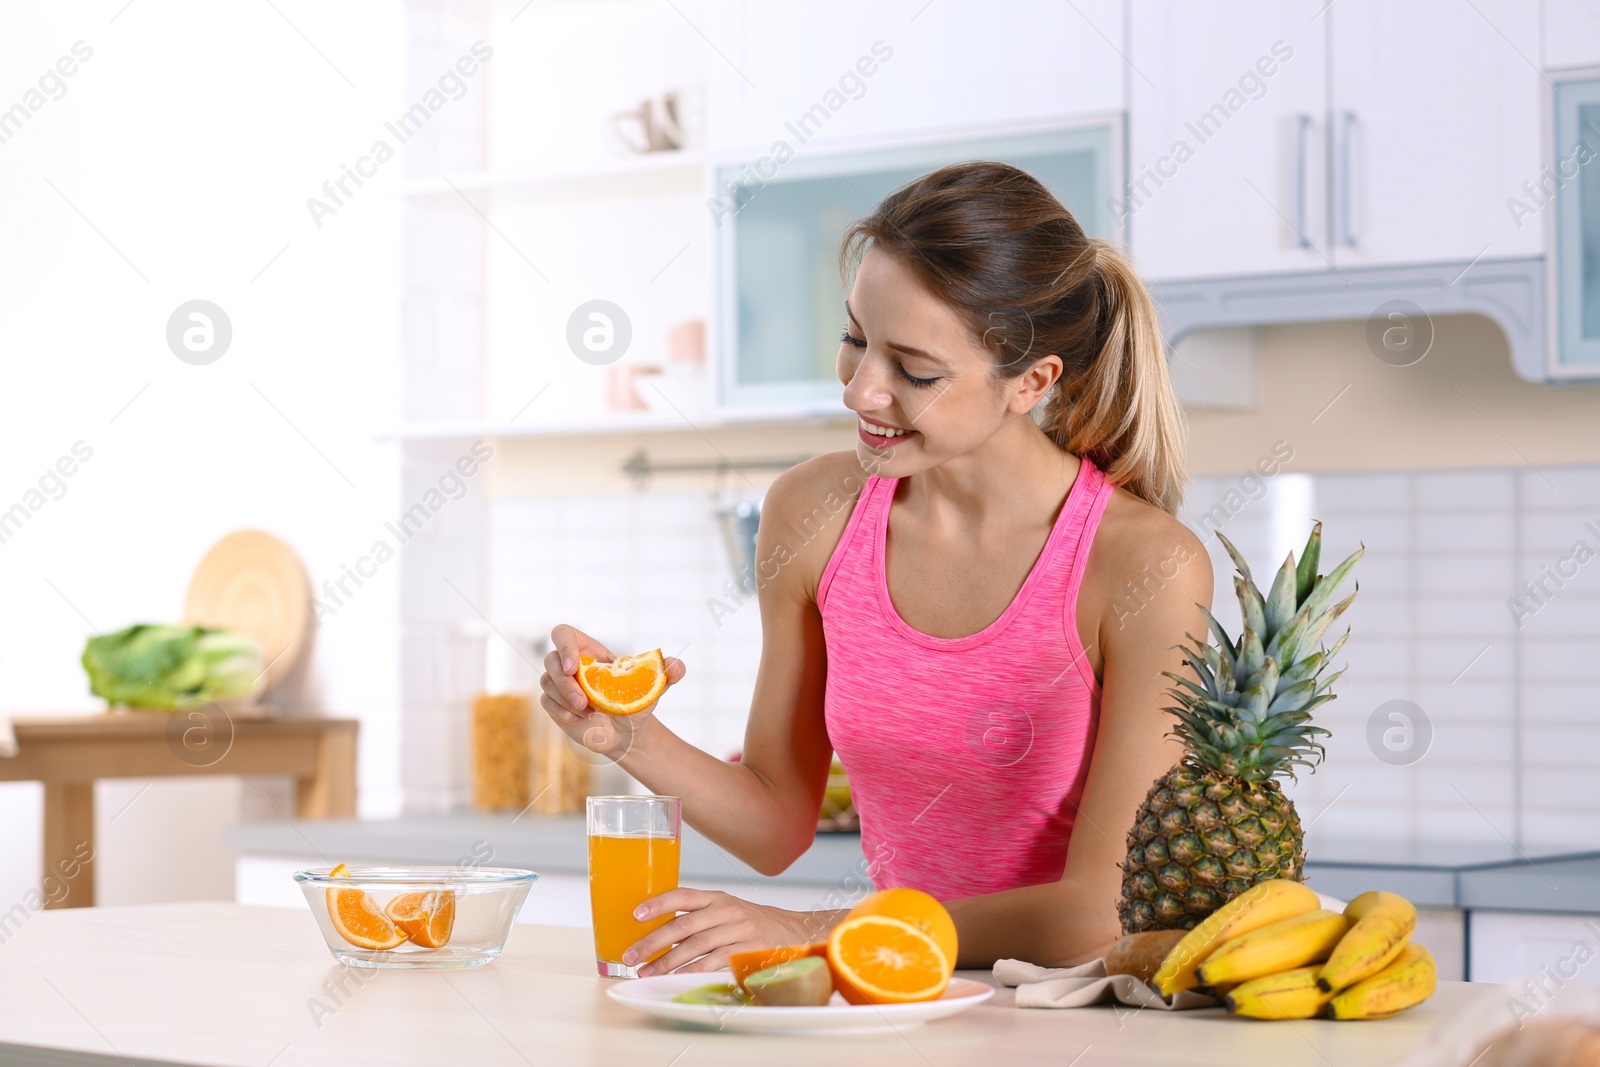 Photo of Woman making orange juice at table in kitchen. Healthy diet